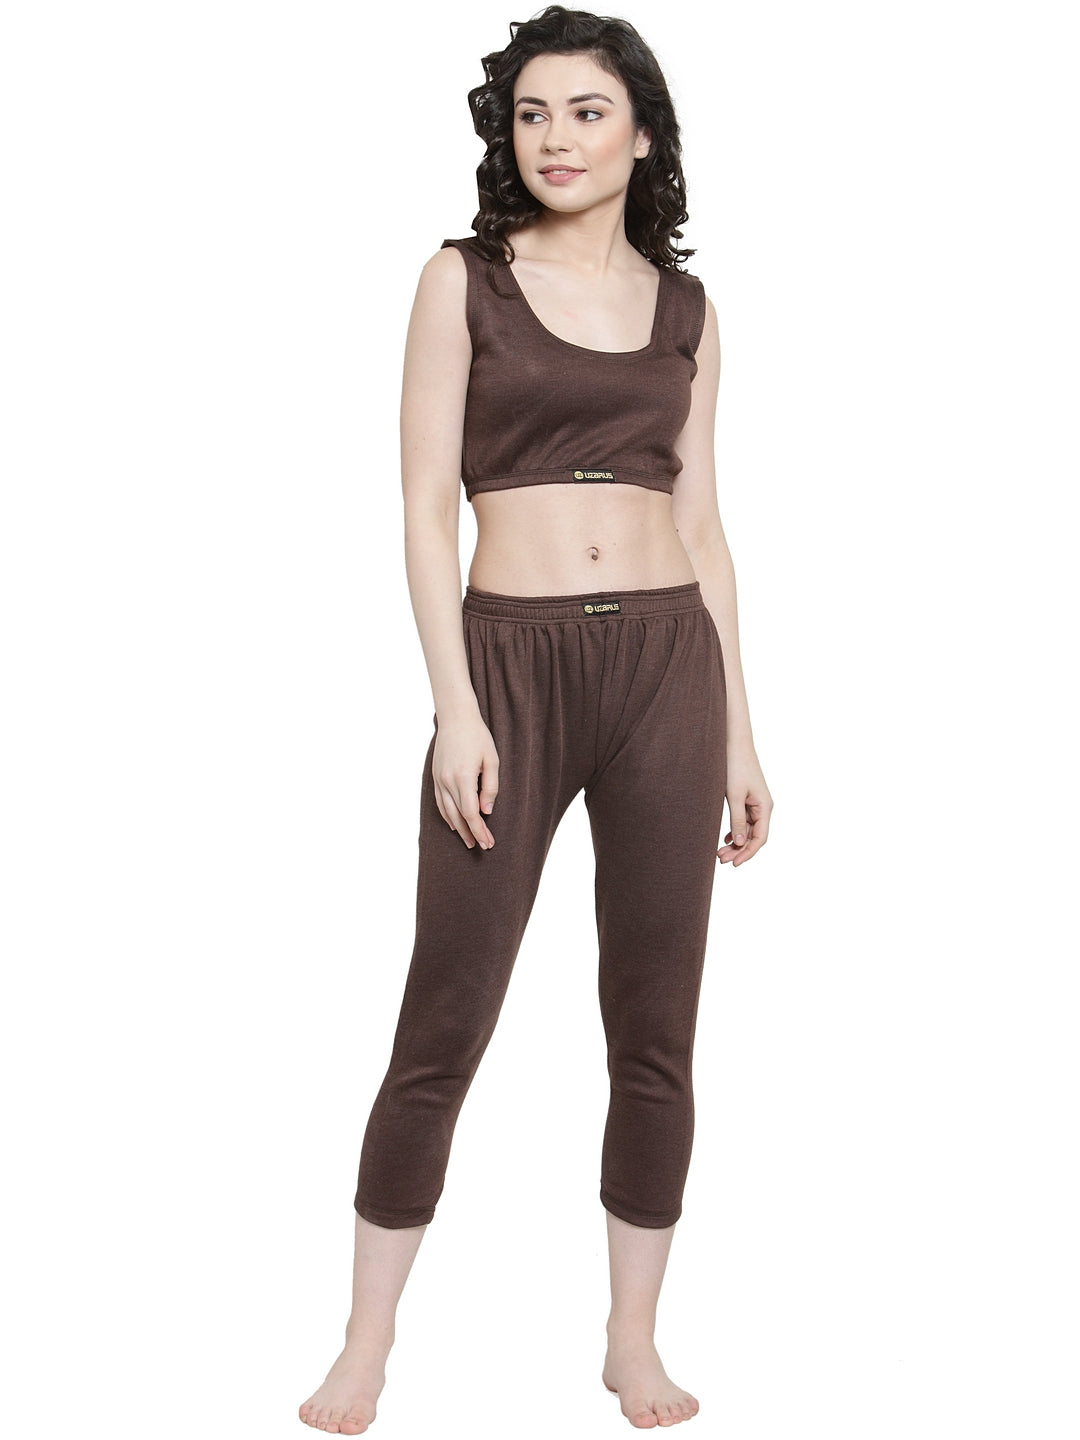 Women's 3/4 Thermal Top And Lower Set